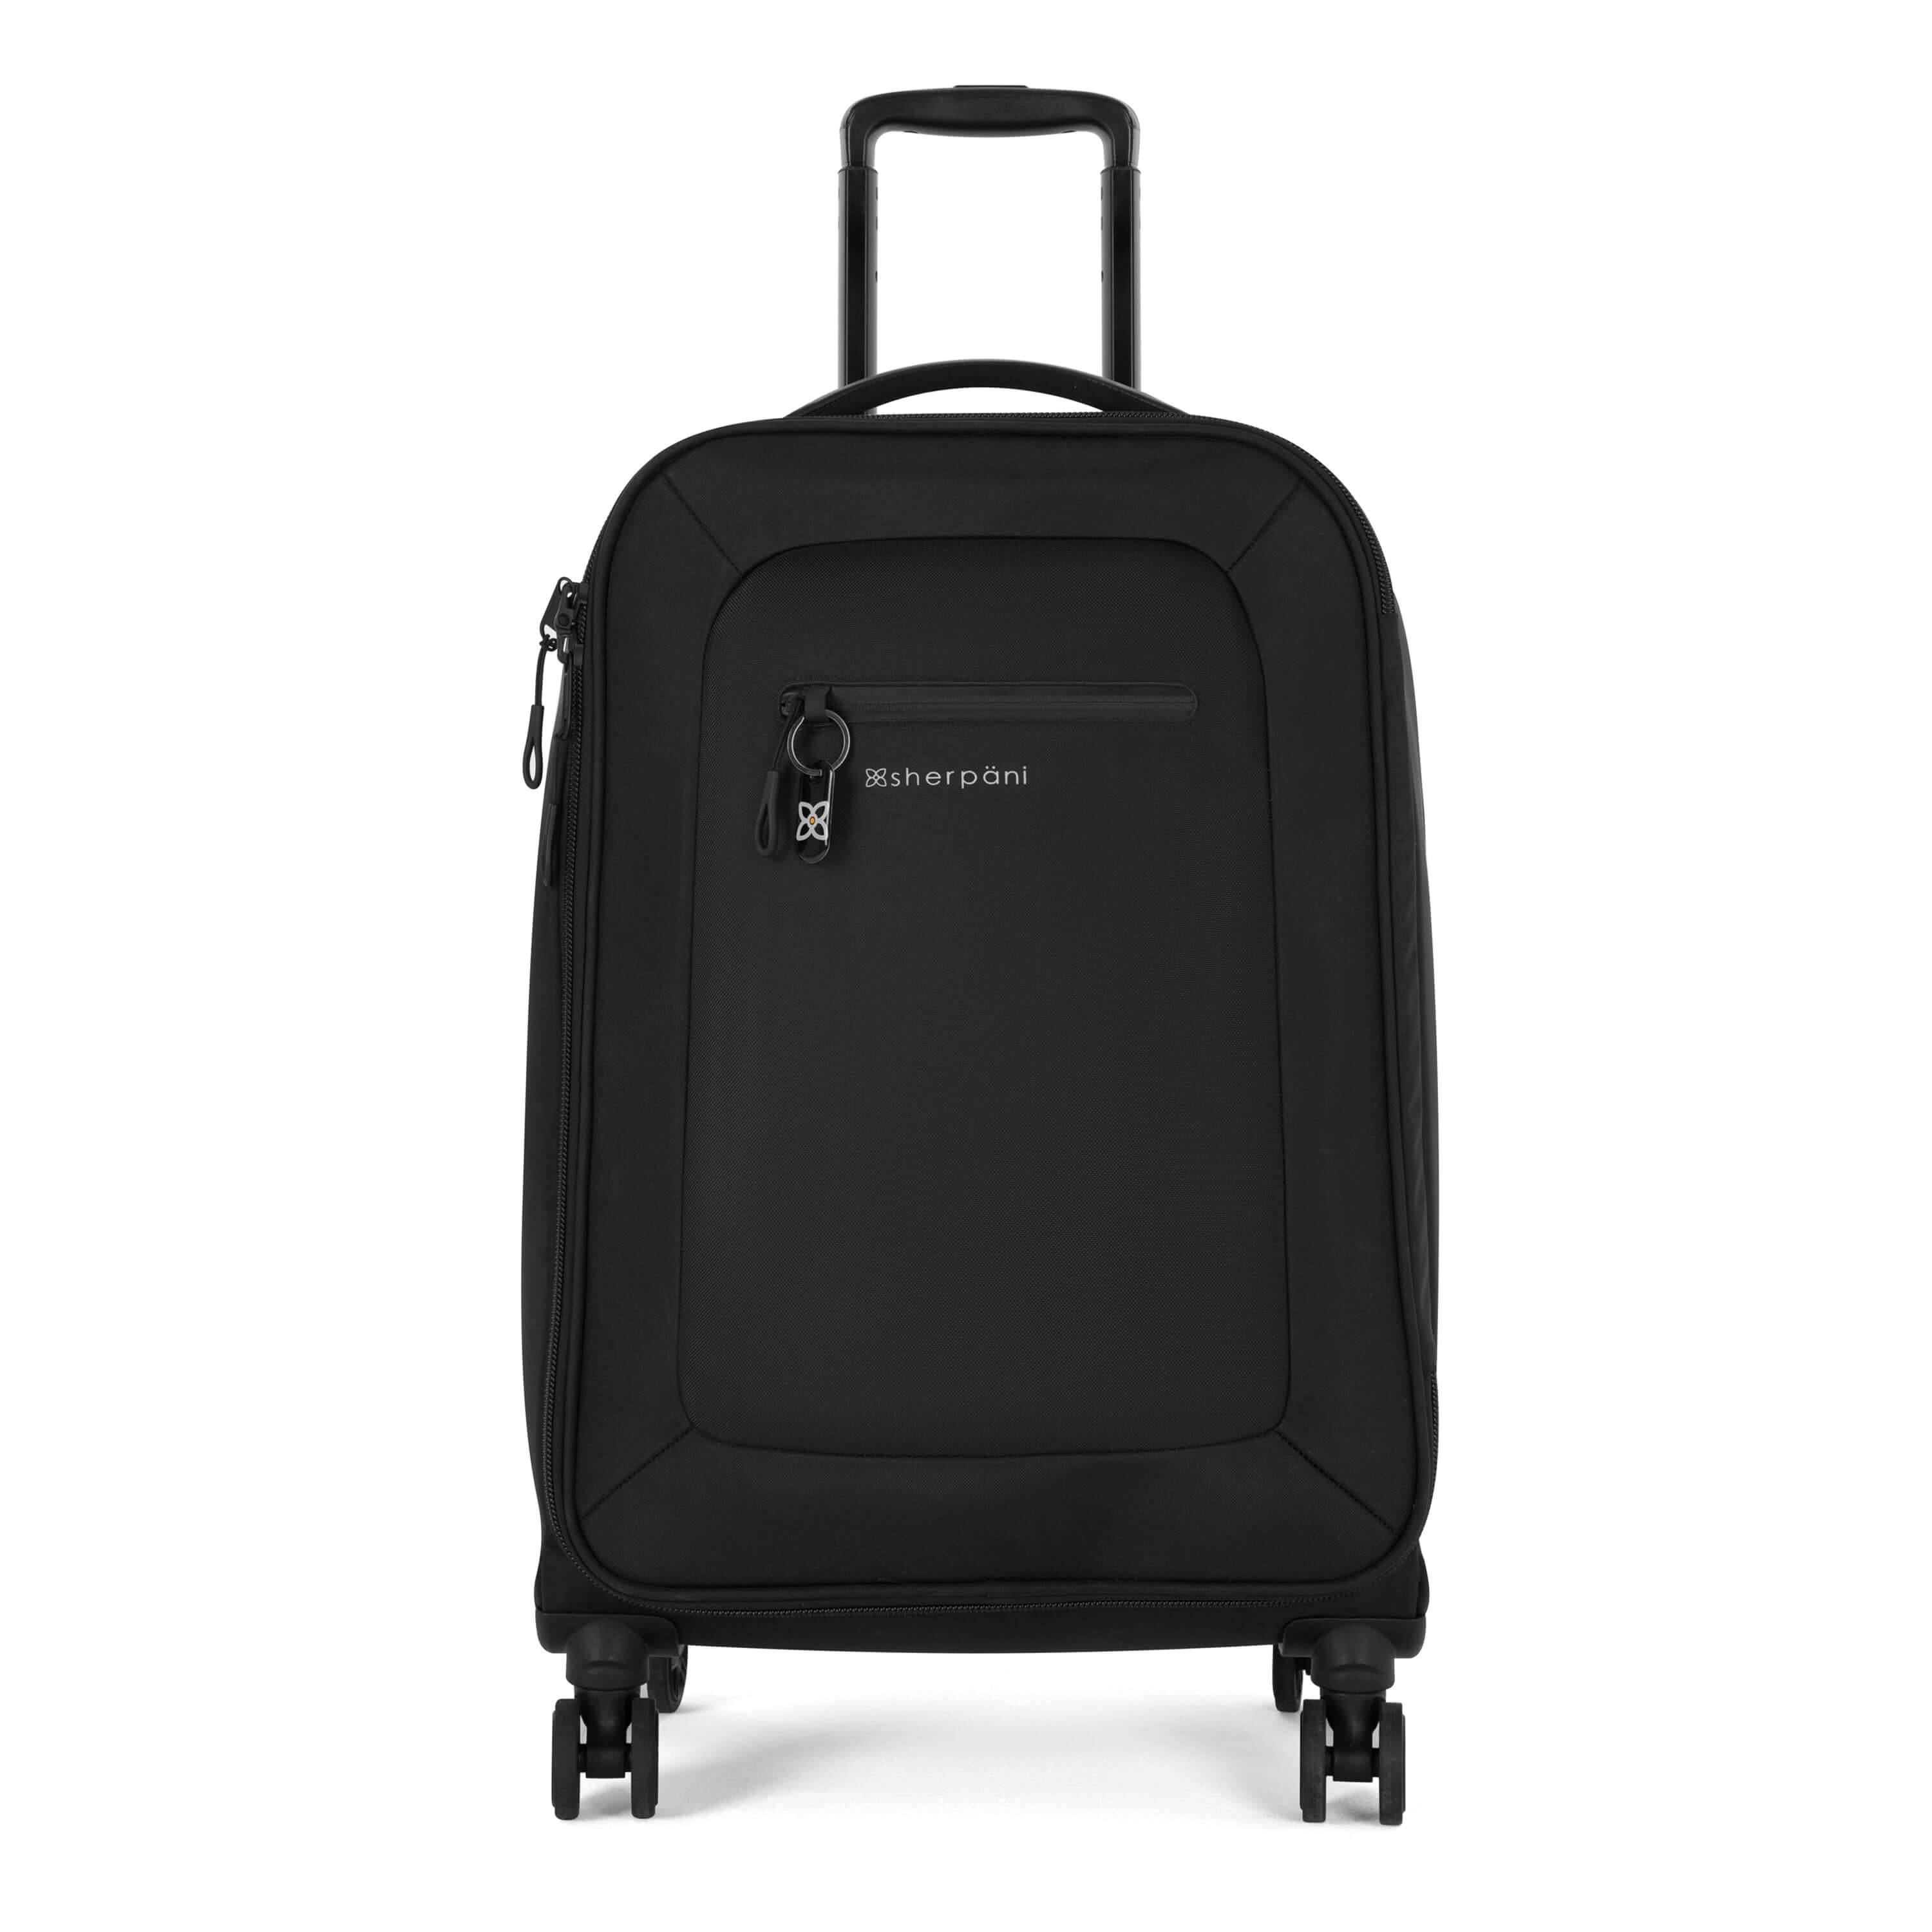 Flat front view of Sherpani’s Anti-Theft luggage the Hemisphere in Carbon. The suitcase has a soft shell exterior made from recycled plastic bottles and features vegan leather accents in black. There is a main zipper compartment and an external pocket on the front with a locking zipper and a ReturnMe tag. On the top of the suitcase sits a retractable luggage handle. On the top and side sit two easy-access handles. At the bottom are four 36-degree spinner wheels for smooth rolling. 